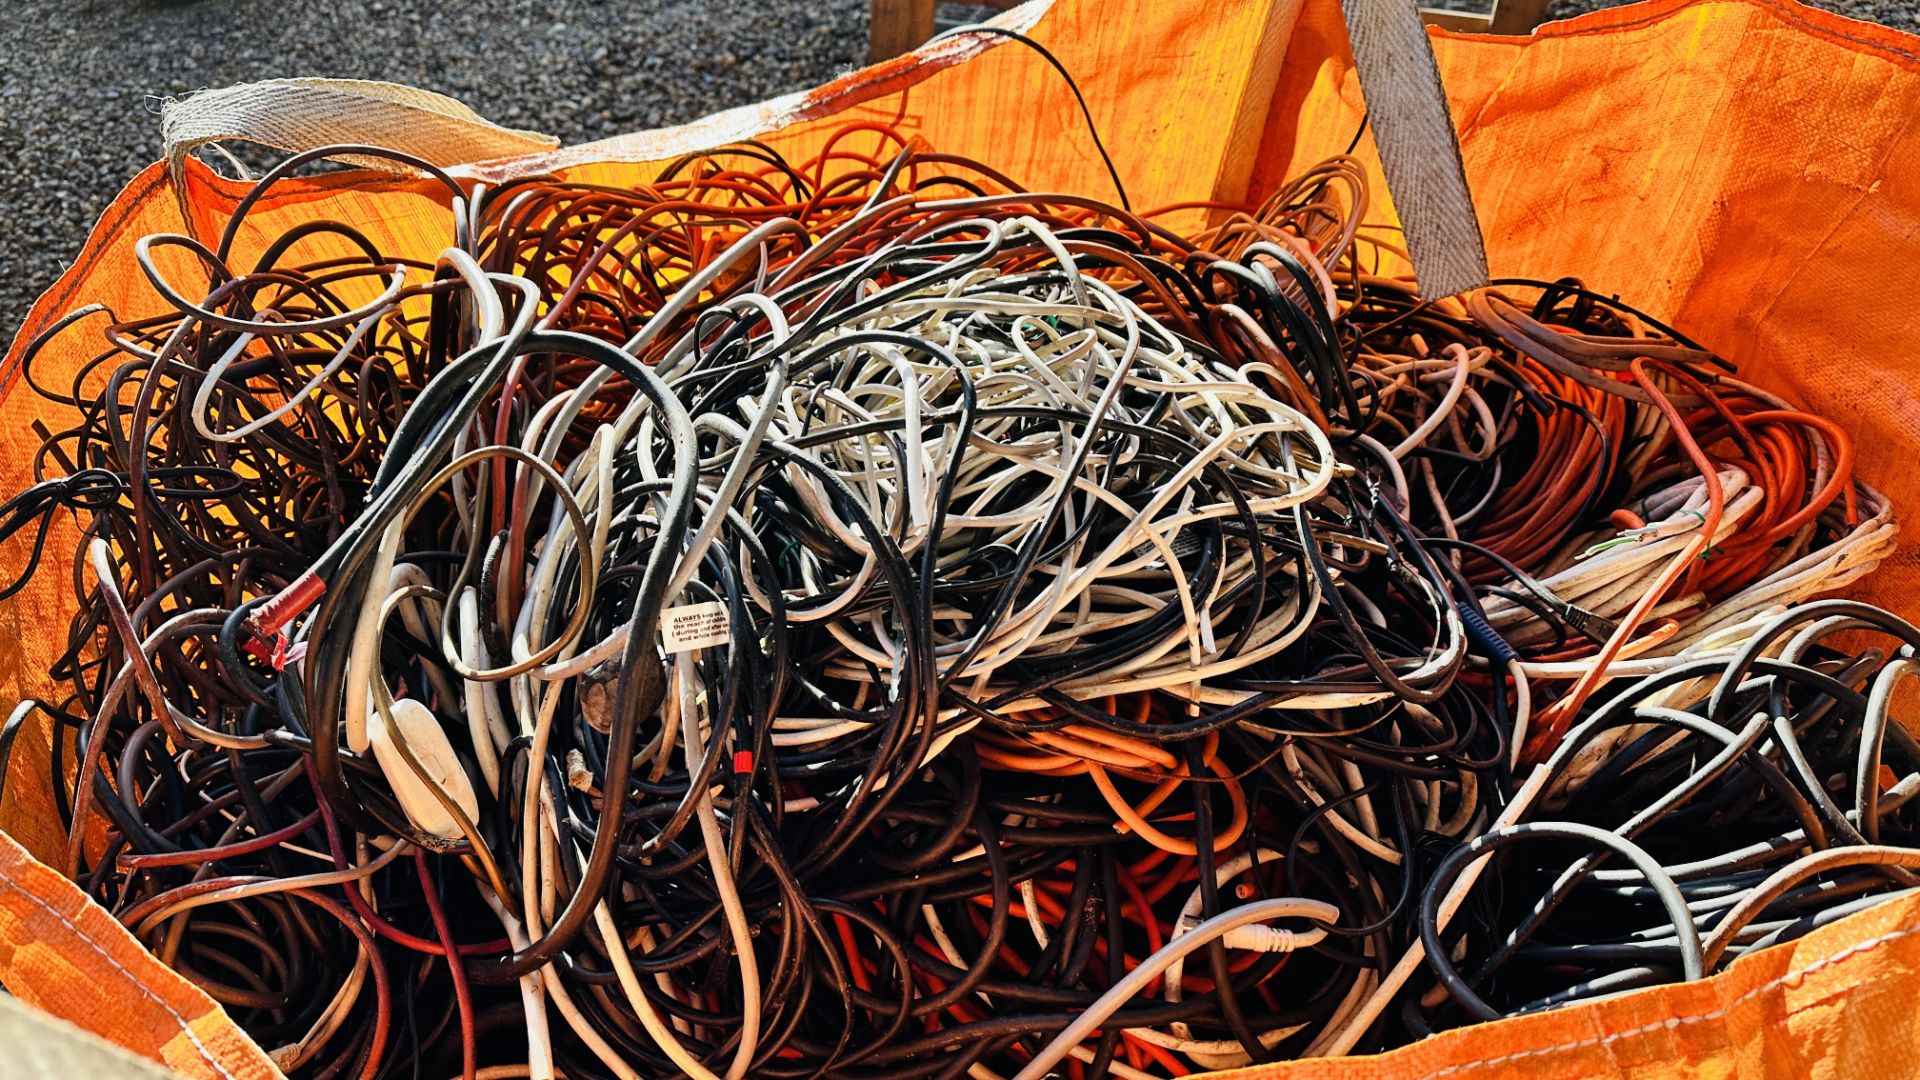 TWO BULK BAGS OF APPROX 360 KG OF SCRAP ELECTRICAL CABLE. - Image 4 of 4